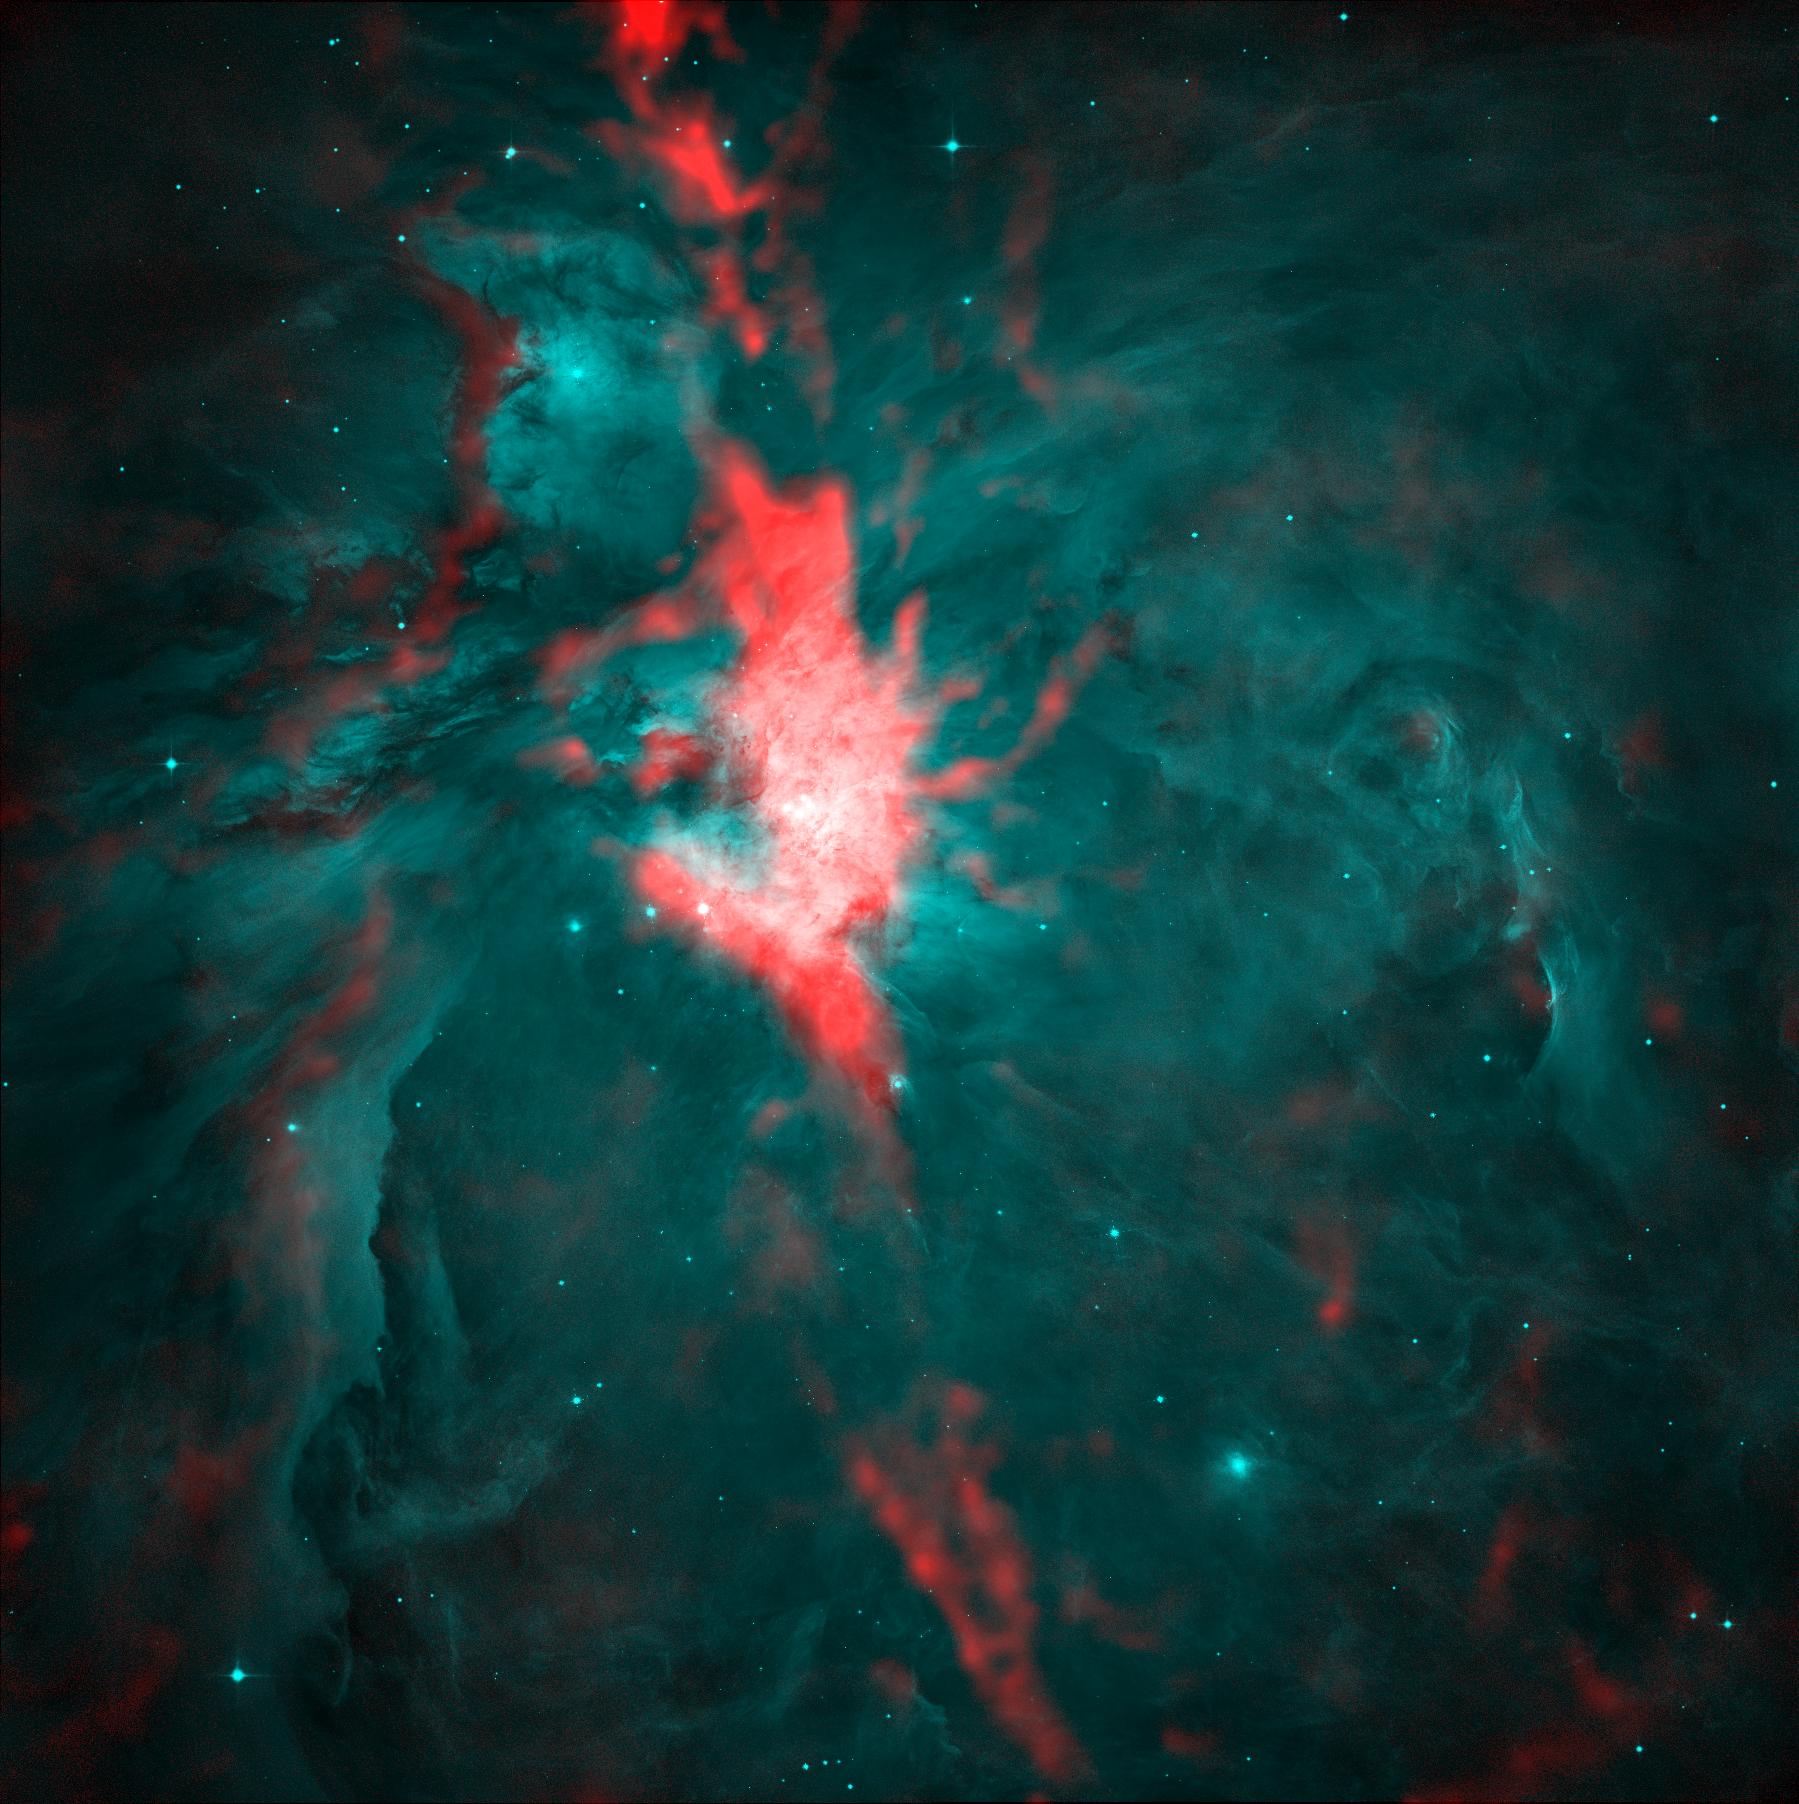 Orion A molecular cloud, with SCUBA-2 850 micron showing dust lanes blocking optical light observed with HST.